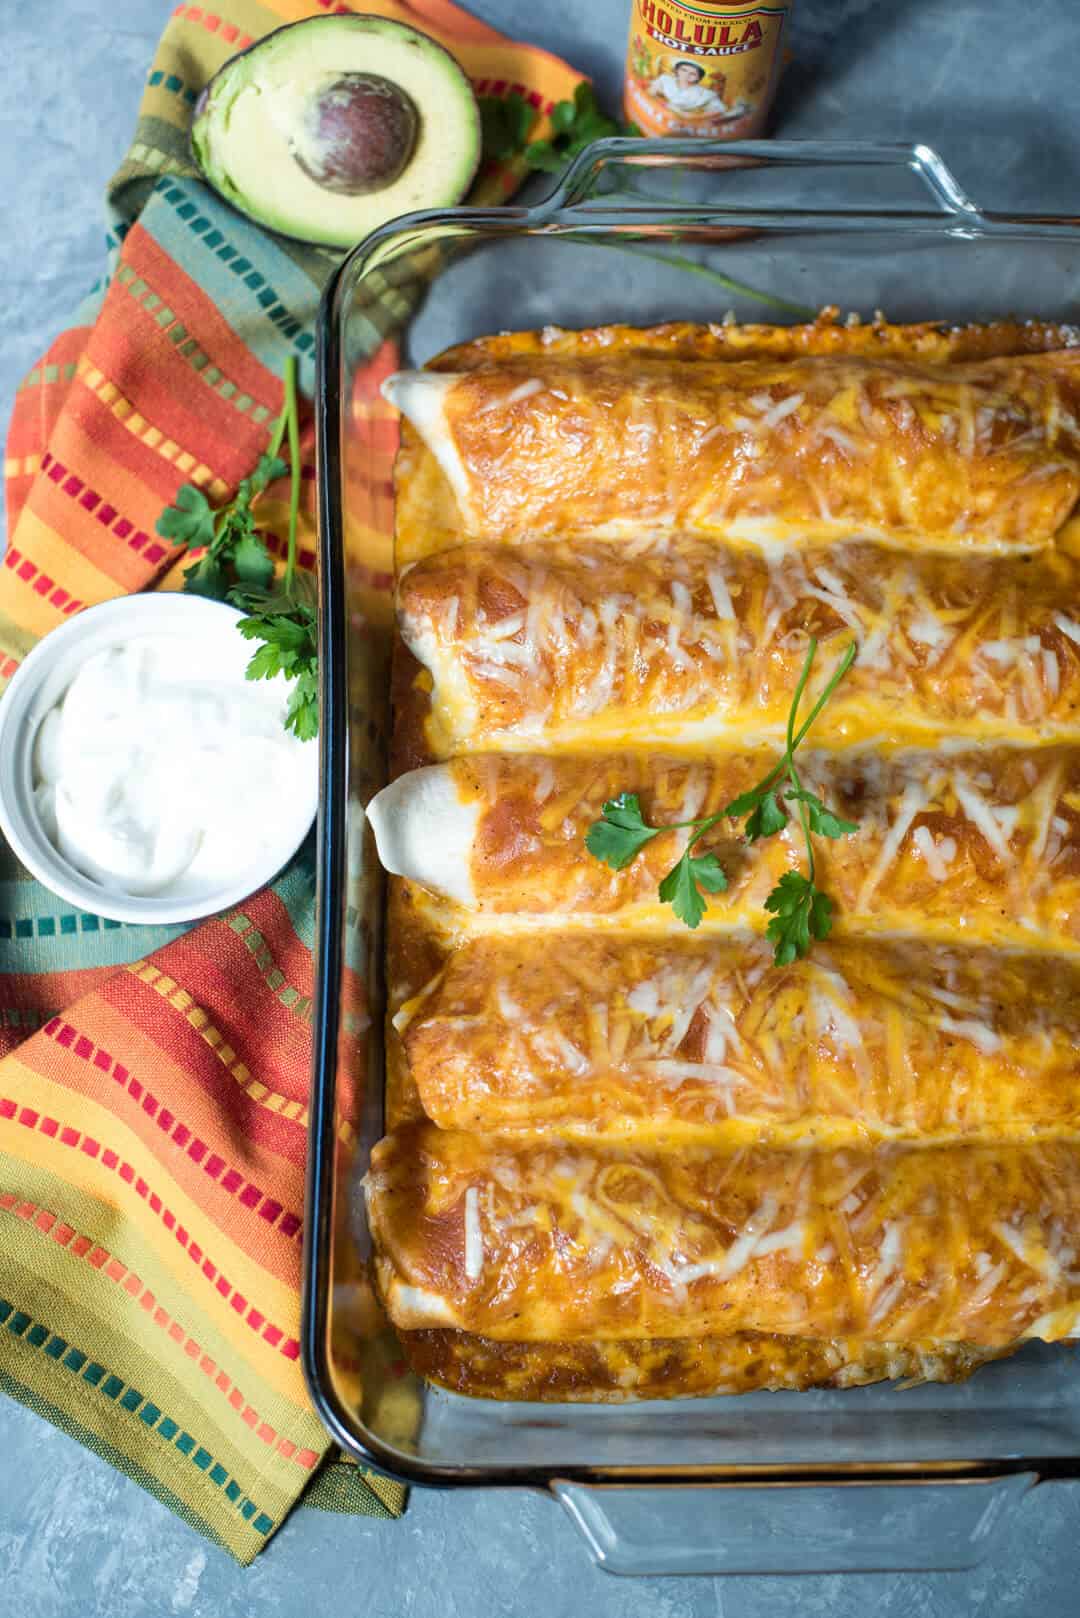 Enchiladas in a baking dish shot from over the top.